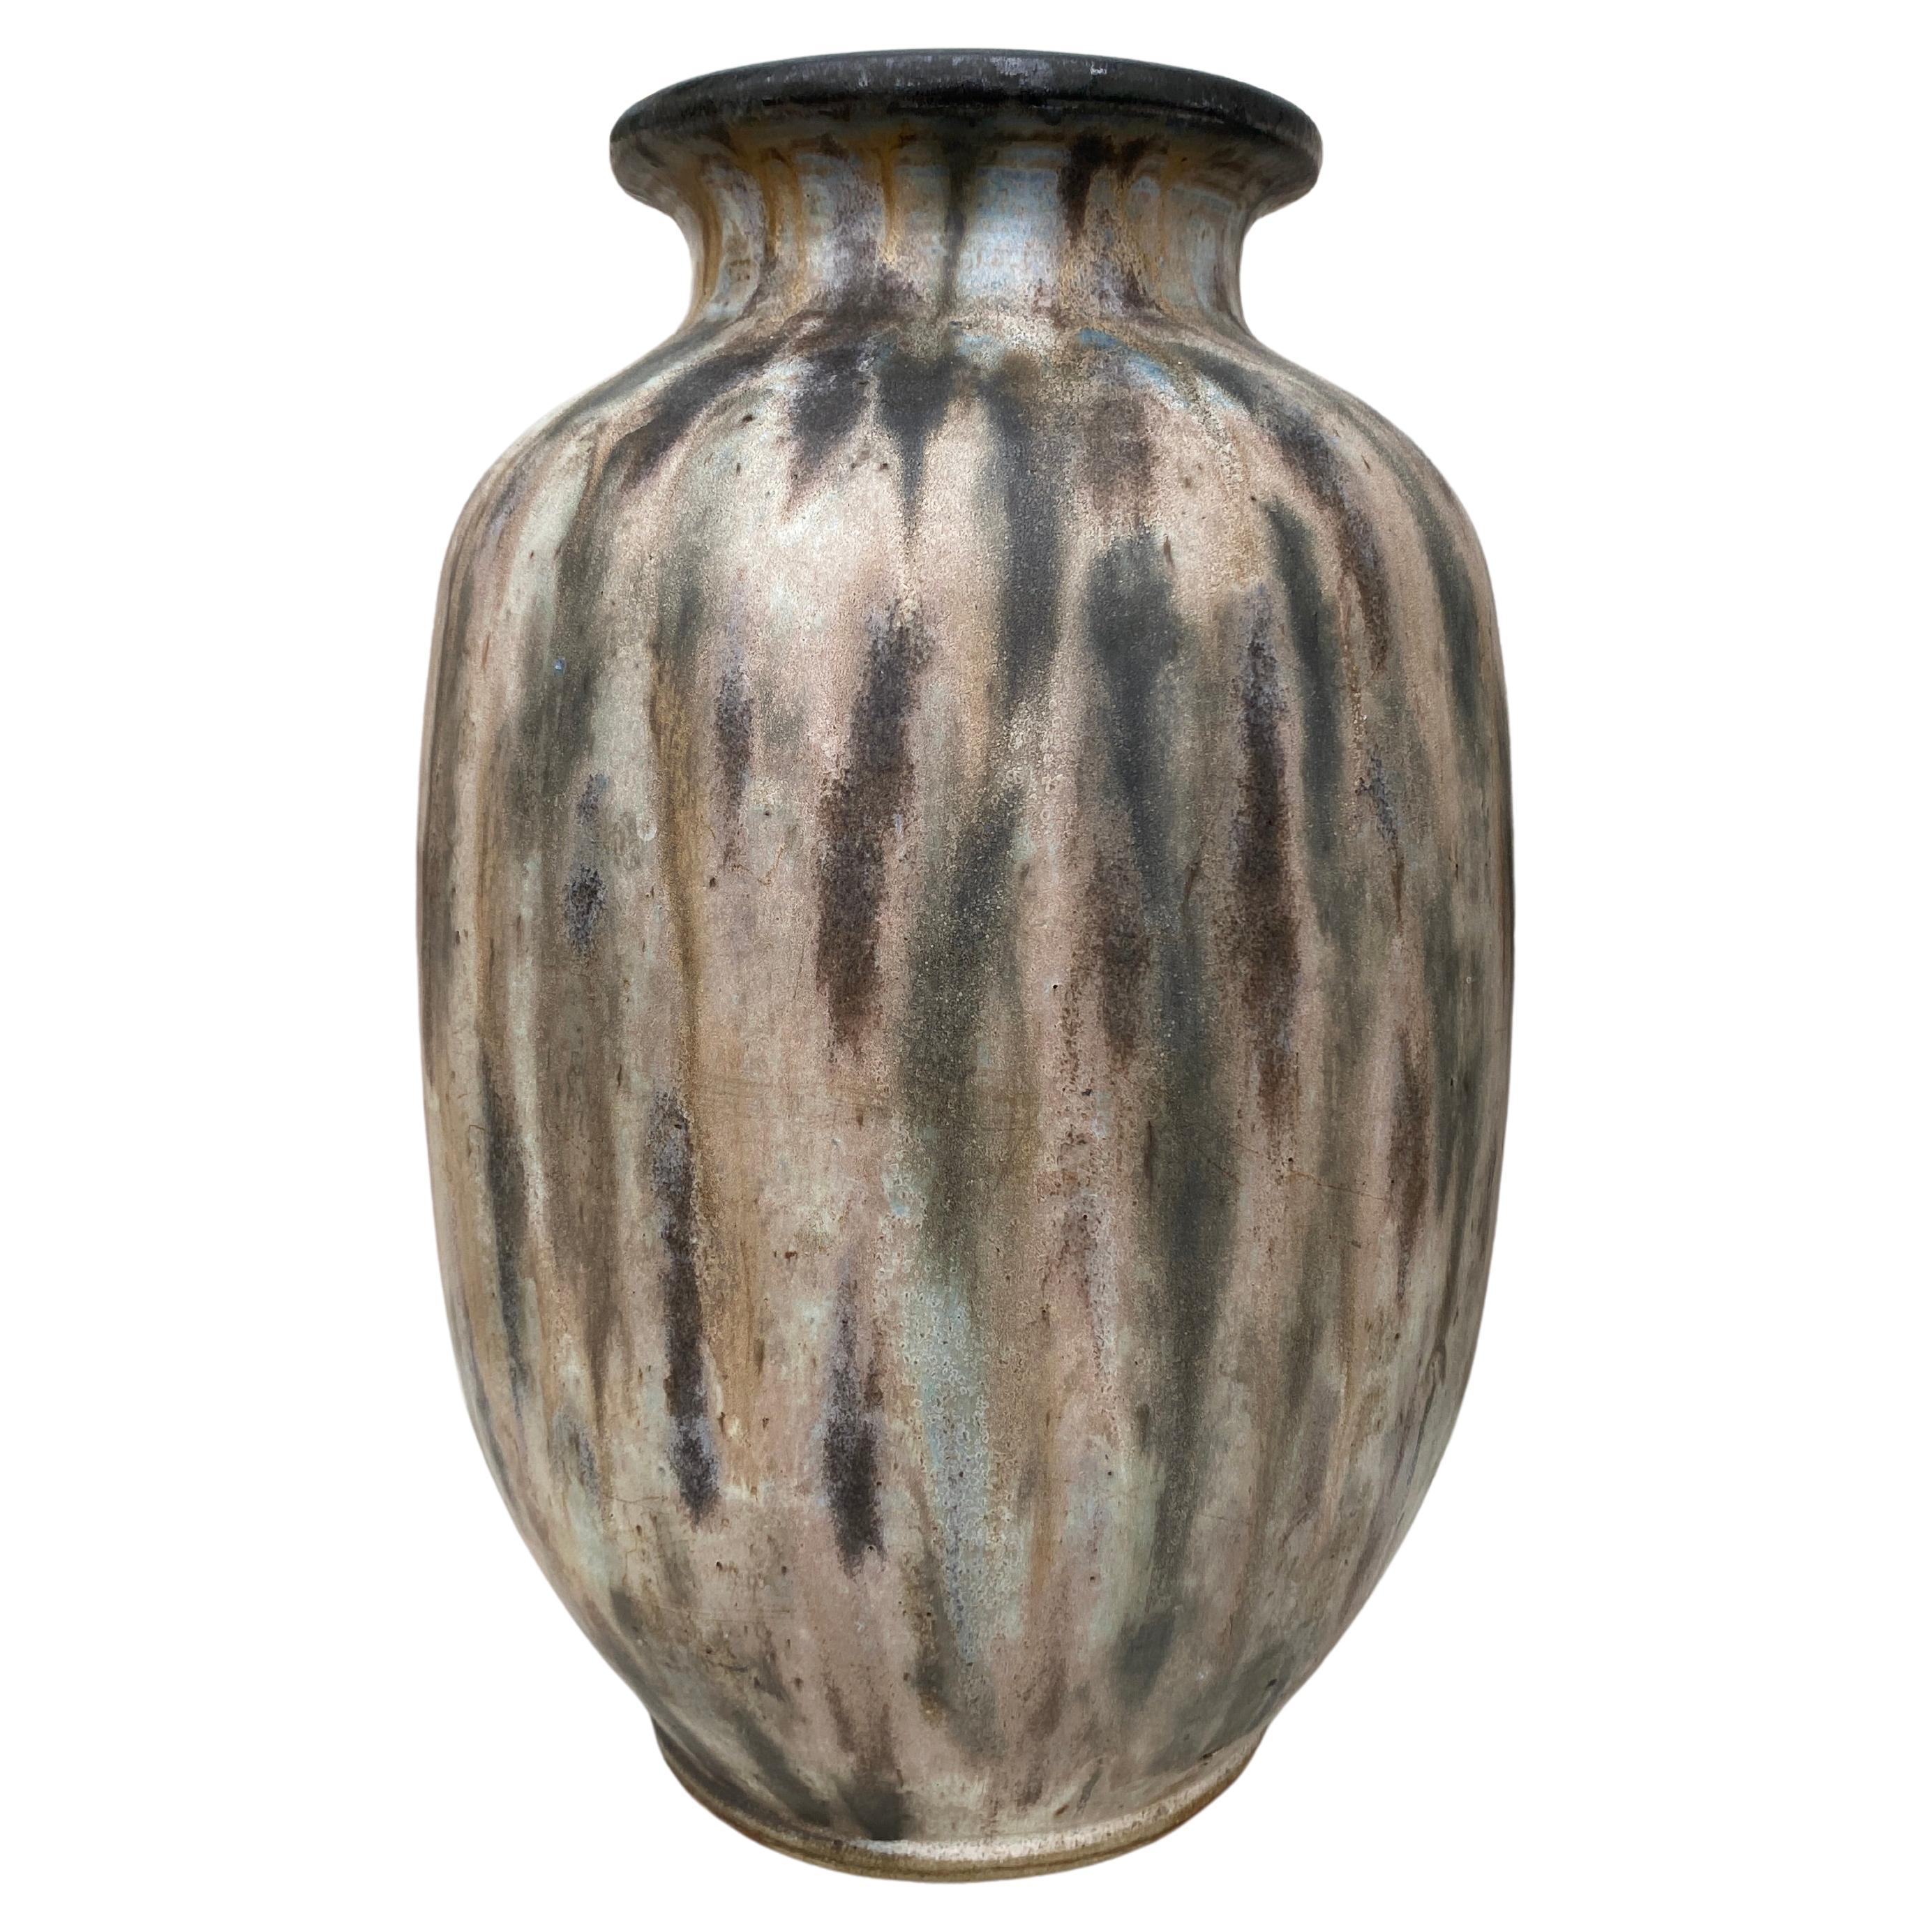 Very Large Pottery vase signed Antoine Dubois for Bouffioulx circa 1930.
Height / 15.5 inches.